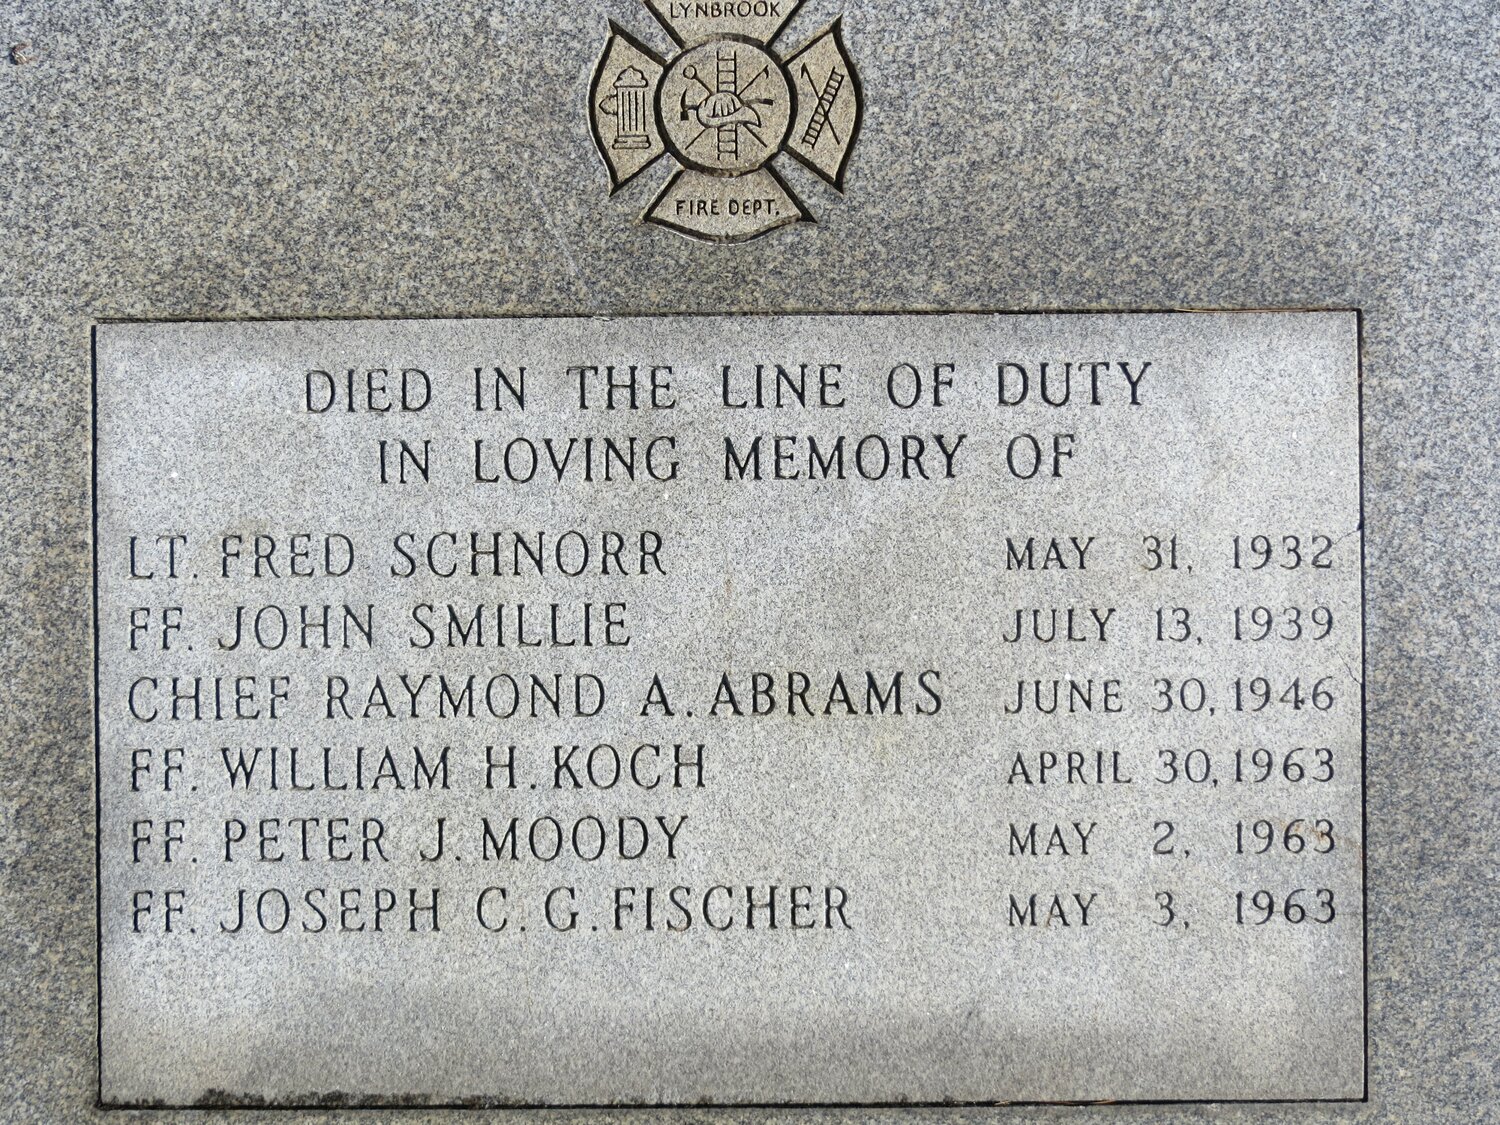 The stone marker at the Firefighter’s Memorial with the names of those killed in the line of duty.